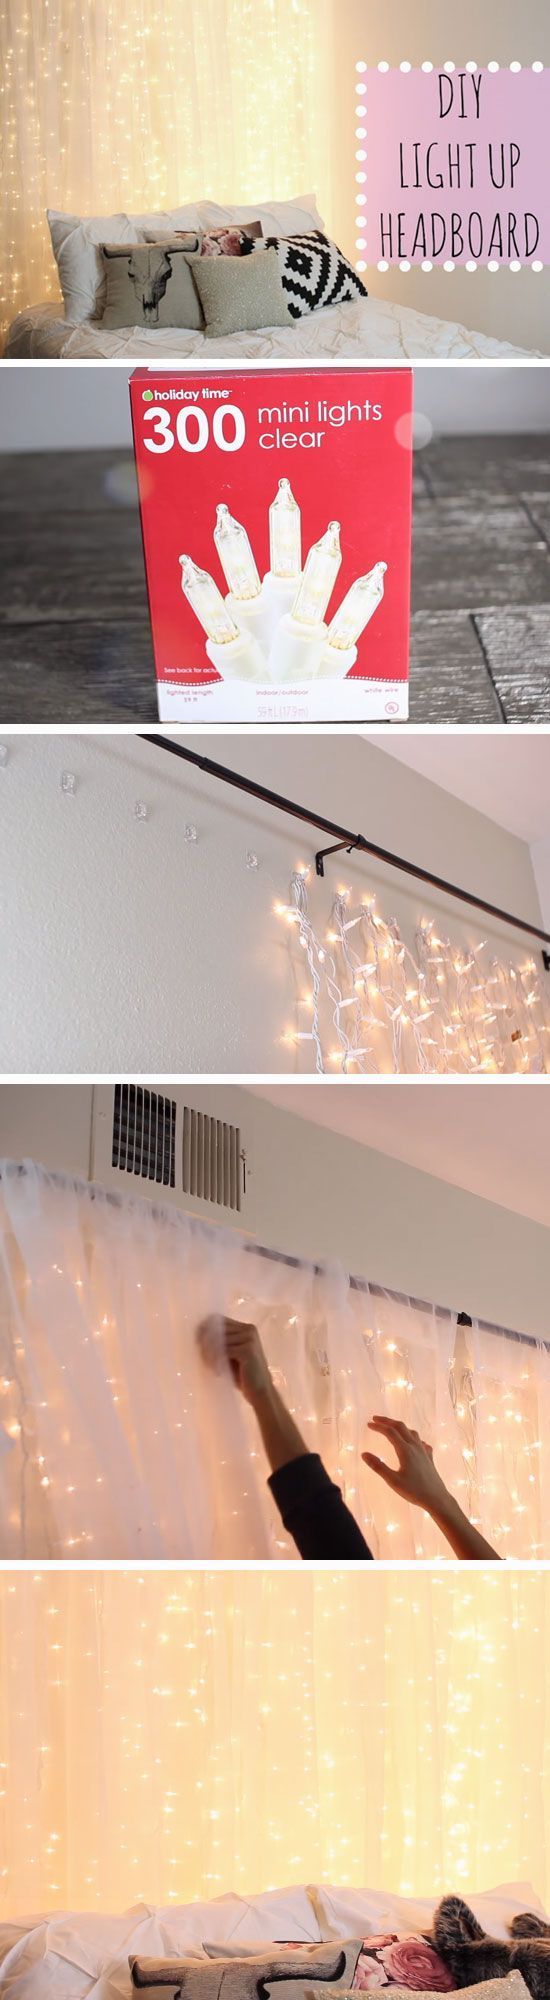 Love this >> 18 DIY Tumblr Dorm Room Concepts for Women | Blupla